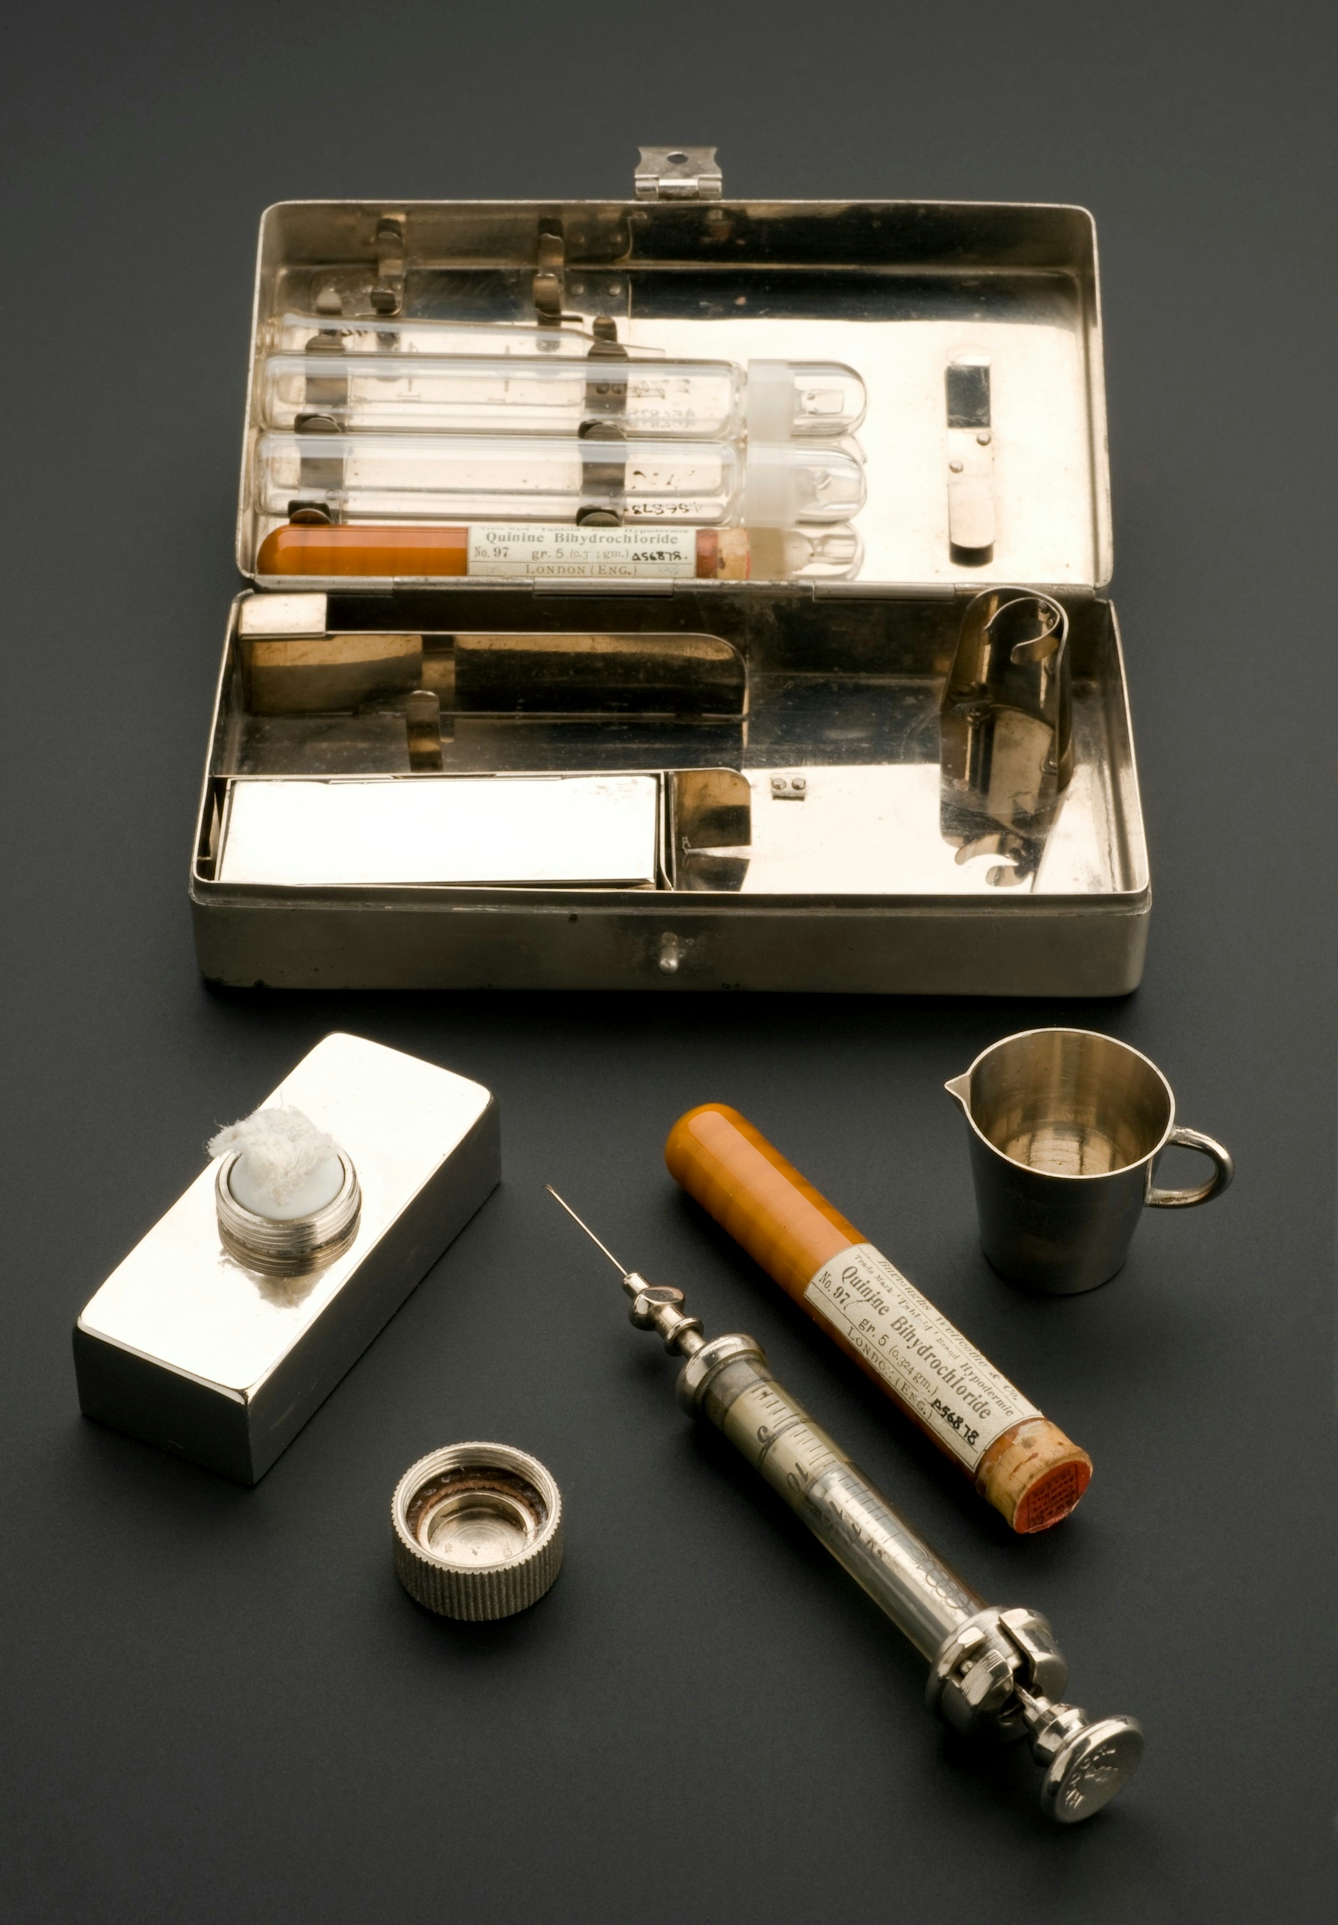 Rectangular metal box containing empty phials. in front of the case, its other contents are laid out: a bottle-shaped container holding cotton wool, a metal syringe with glass body, a tube of quinine bihydrochloride and a small metal jug.